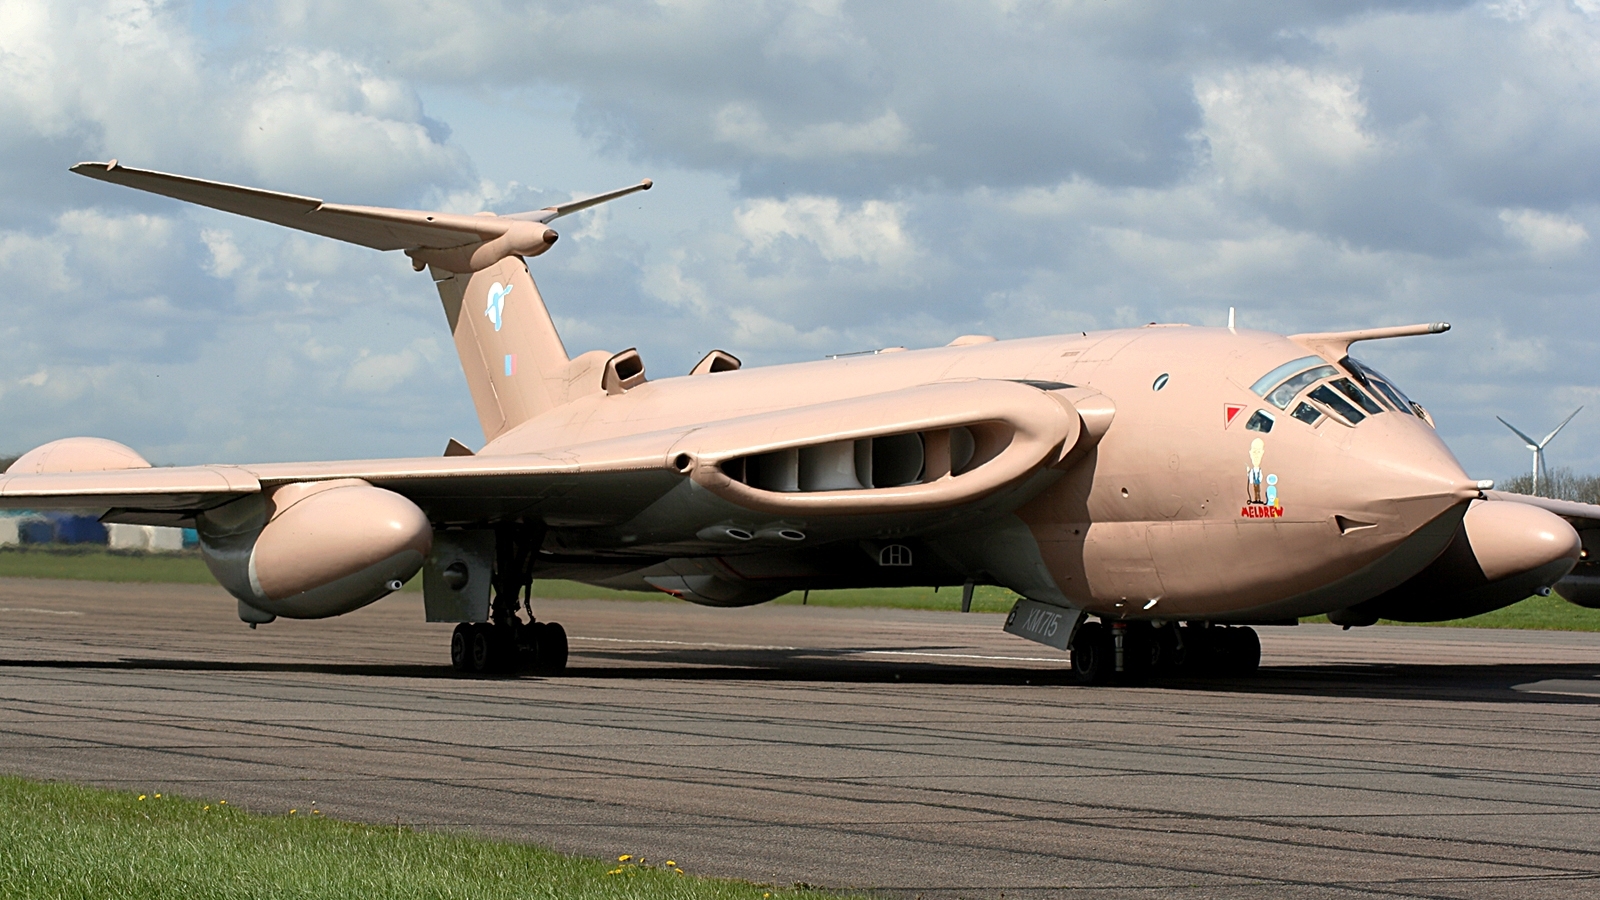 military, handley page victor, bombers